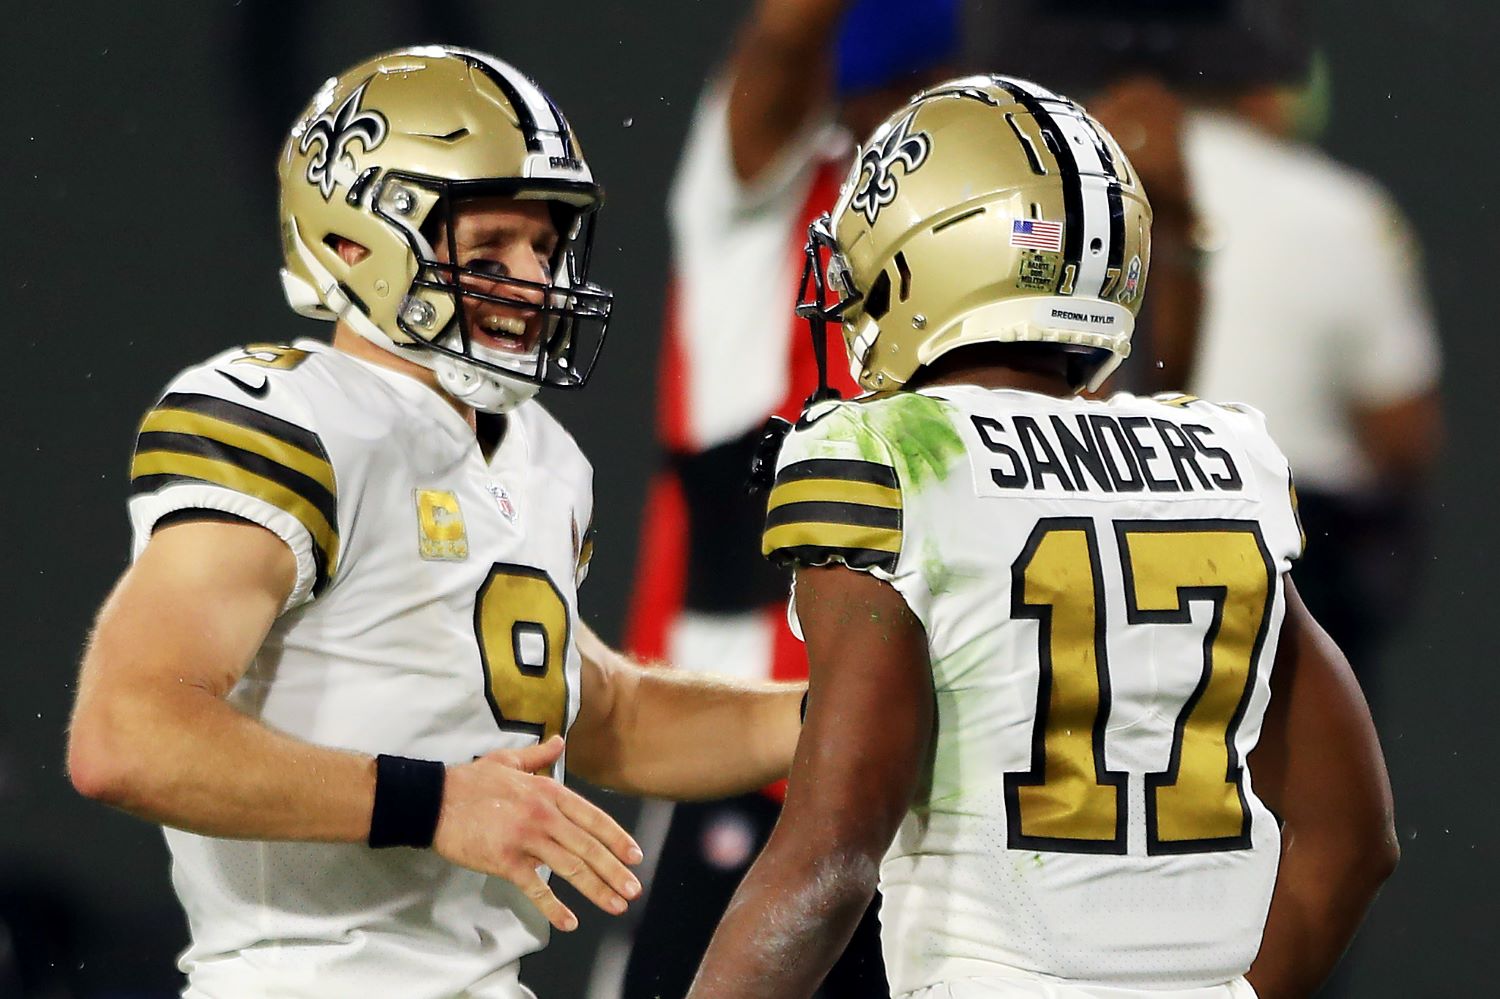 Drew Brees helped one of his New Orleans Saints teammates earn a $500,000 bonus in Sunday's 33-7 win against the Carolina Panthers.